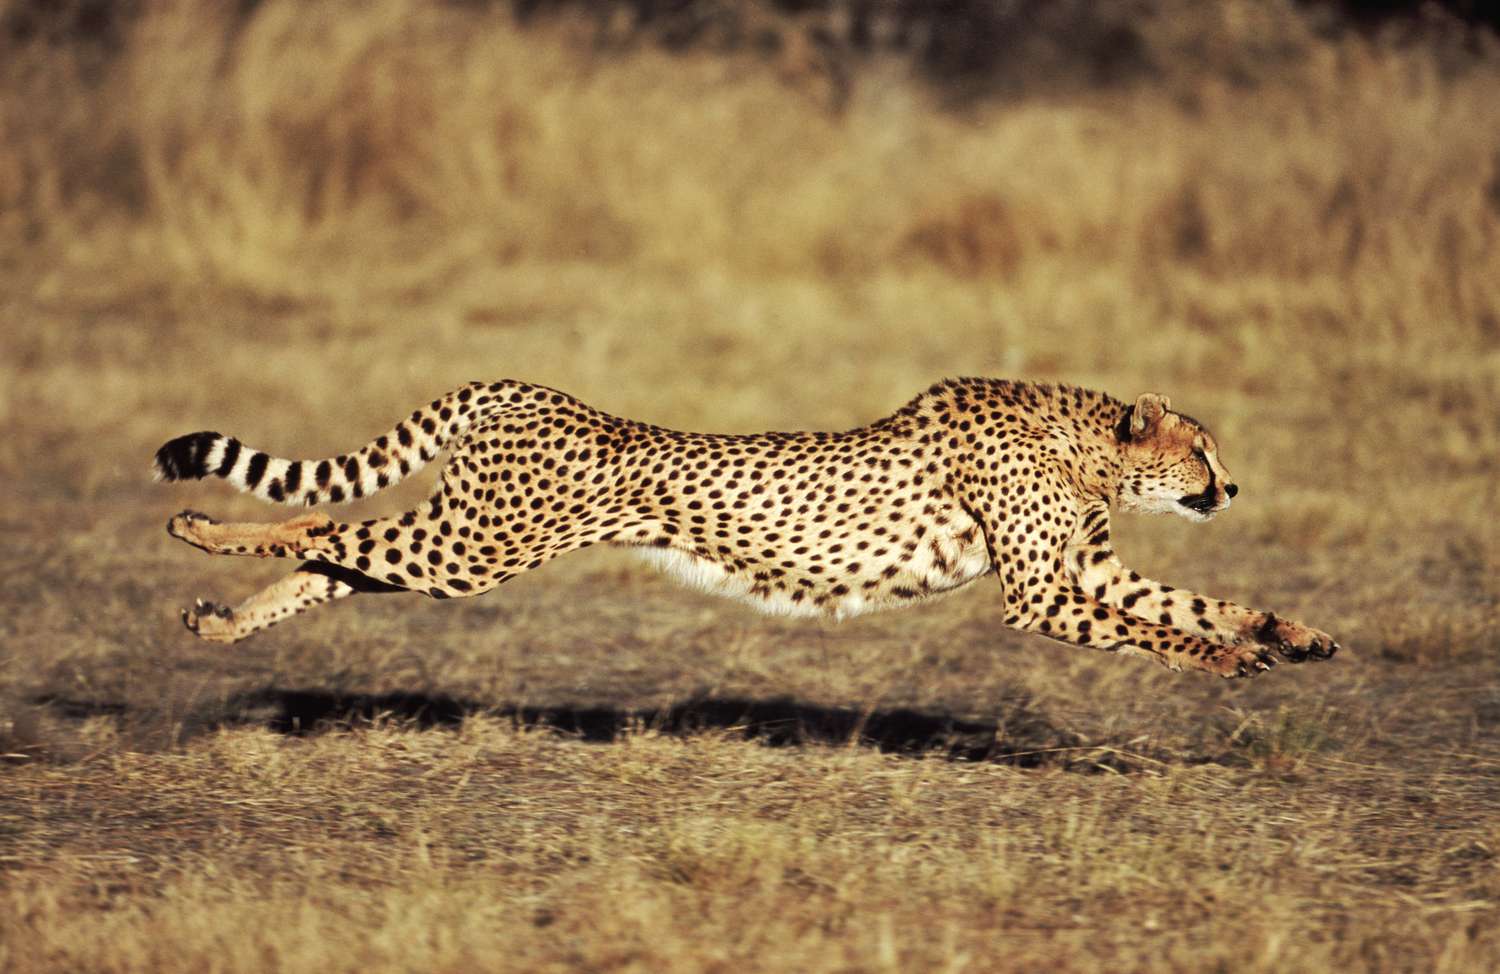 how fast are cheetahs